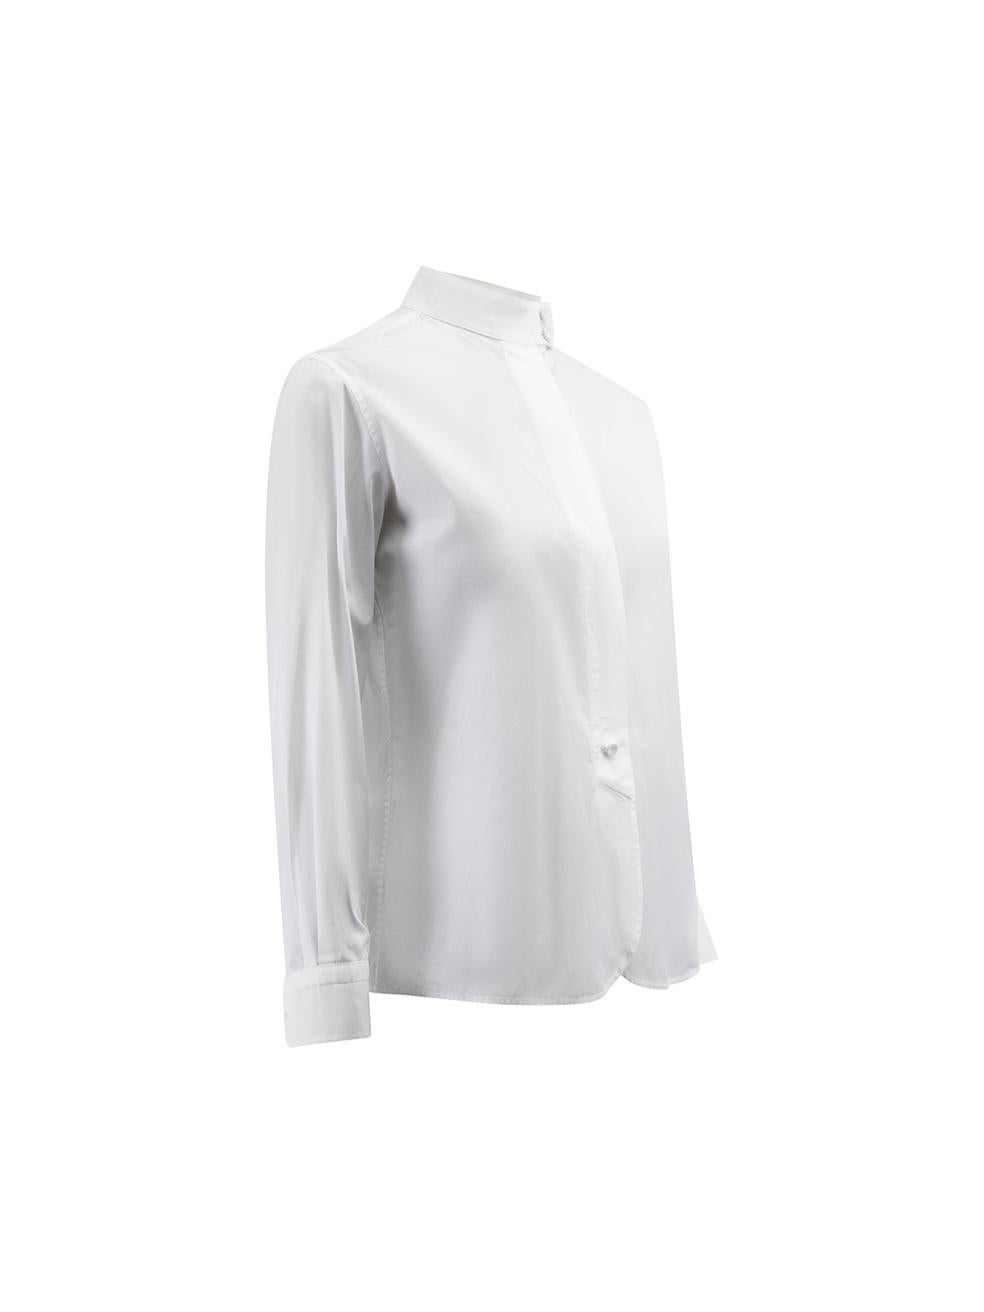 CONDITION is Never Worn. No visible wear to shirt is evident on this used Hermès designer resale item.



Details


White

Cotton

Long sleeves shirt

Front button up closure

Mock neck collared

Buttoned cuffs





Made in